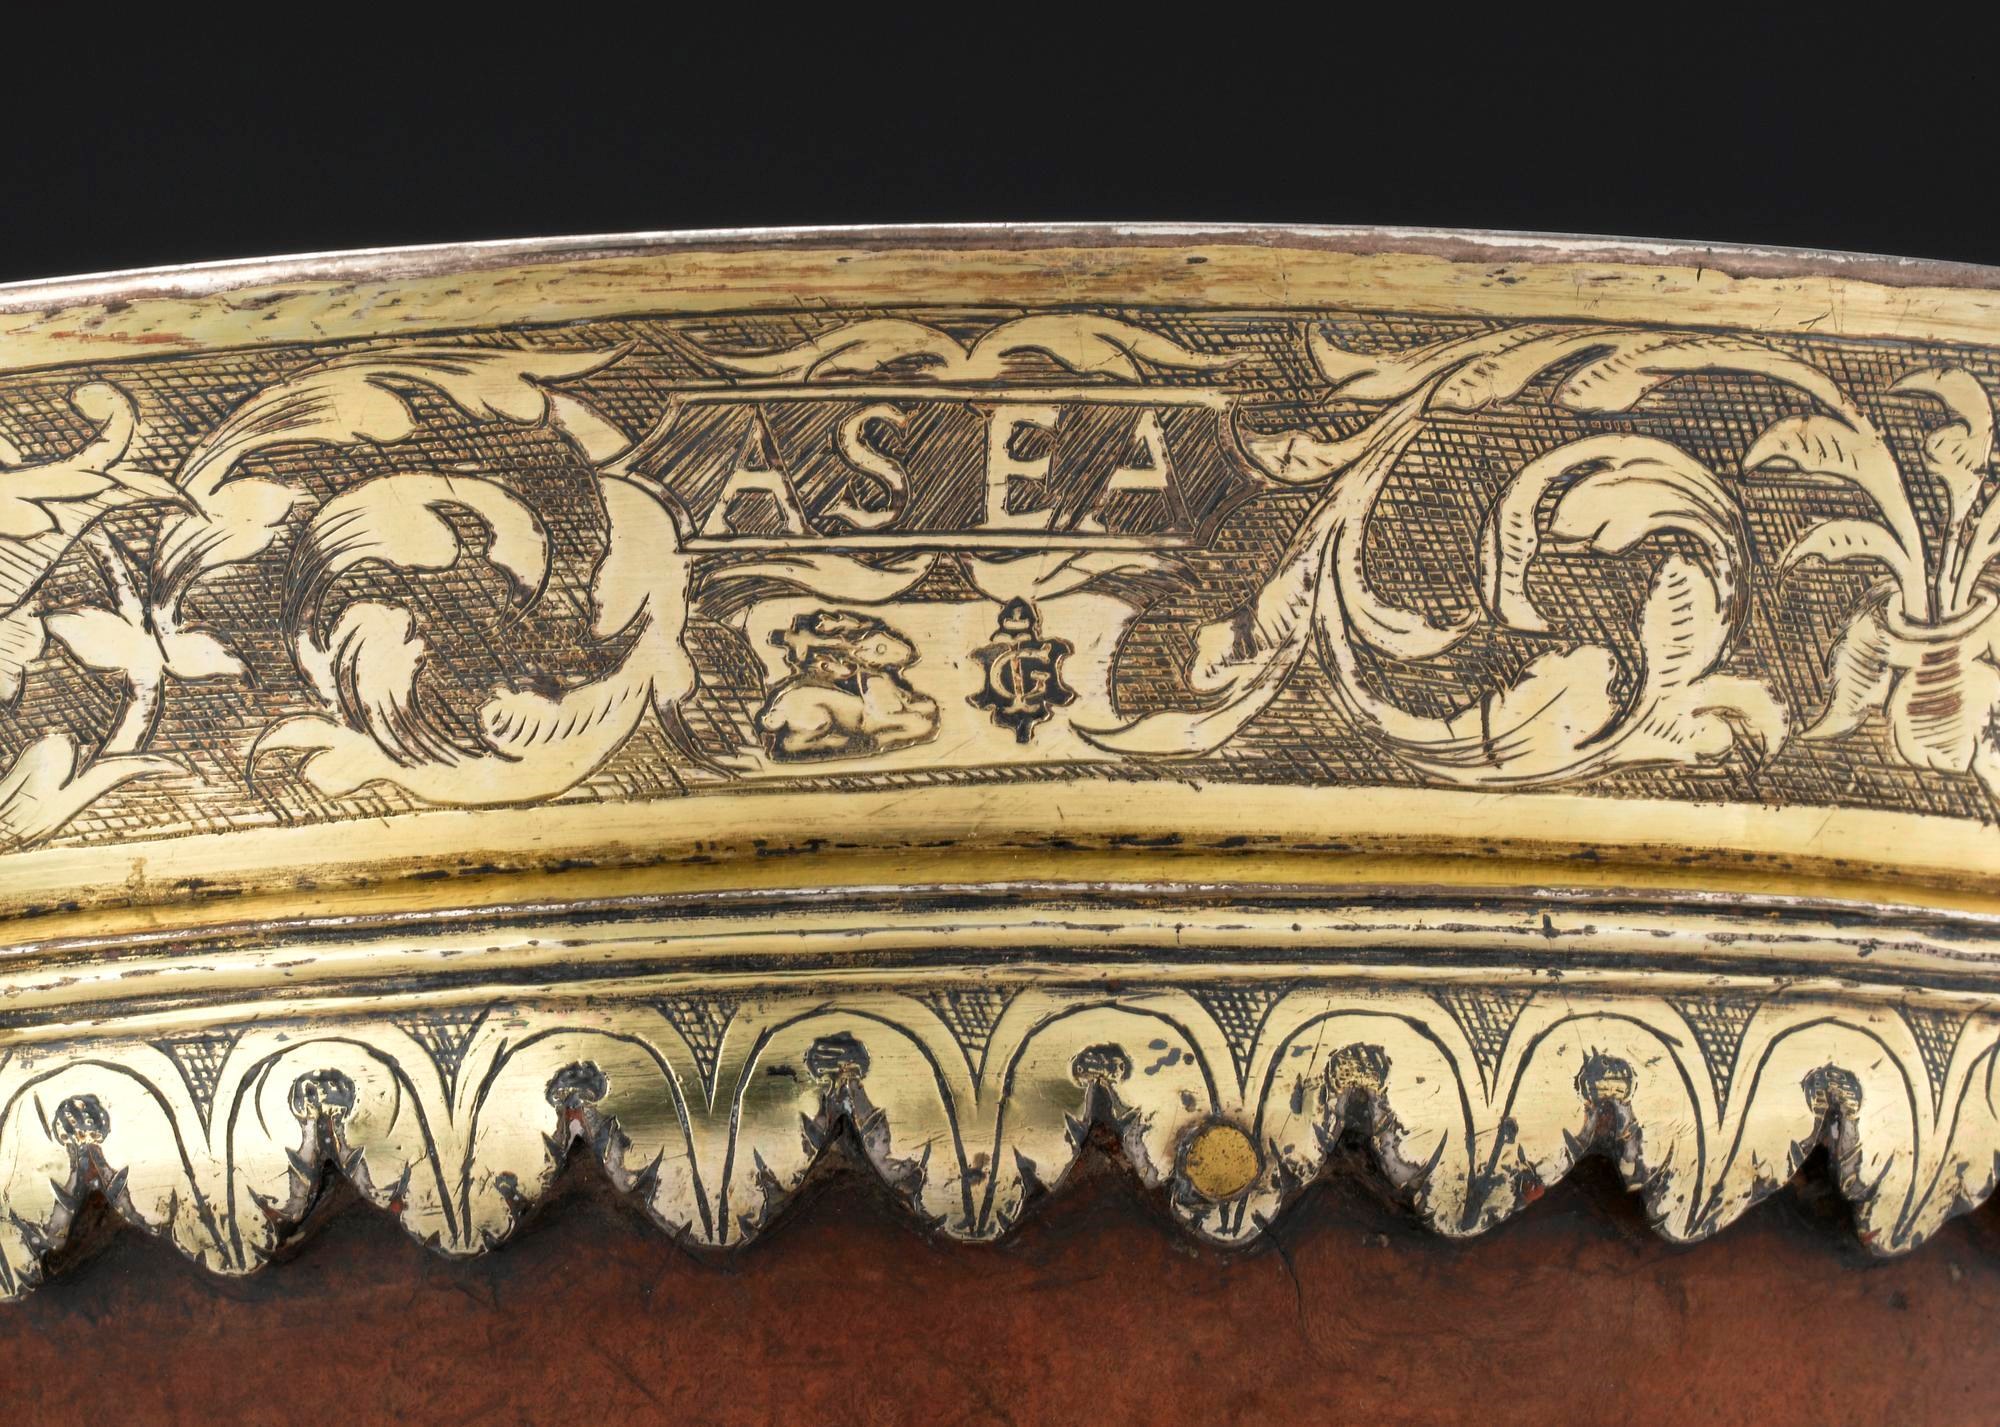 Closeup of the rim of the mazer, made from gold-coloured silver. The metal is engraved with the initials 'AS' and 'EA', and flanked by floral patterns.